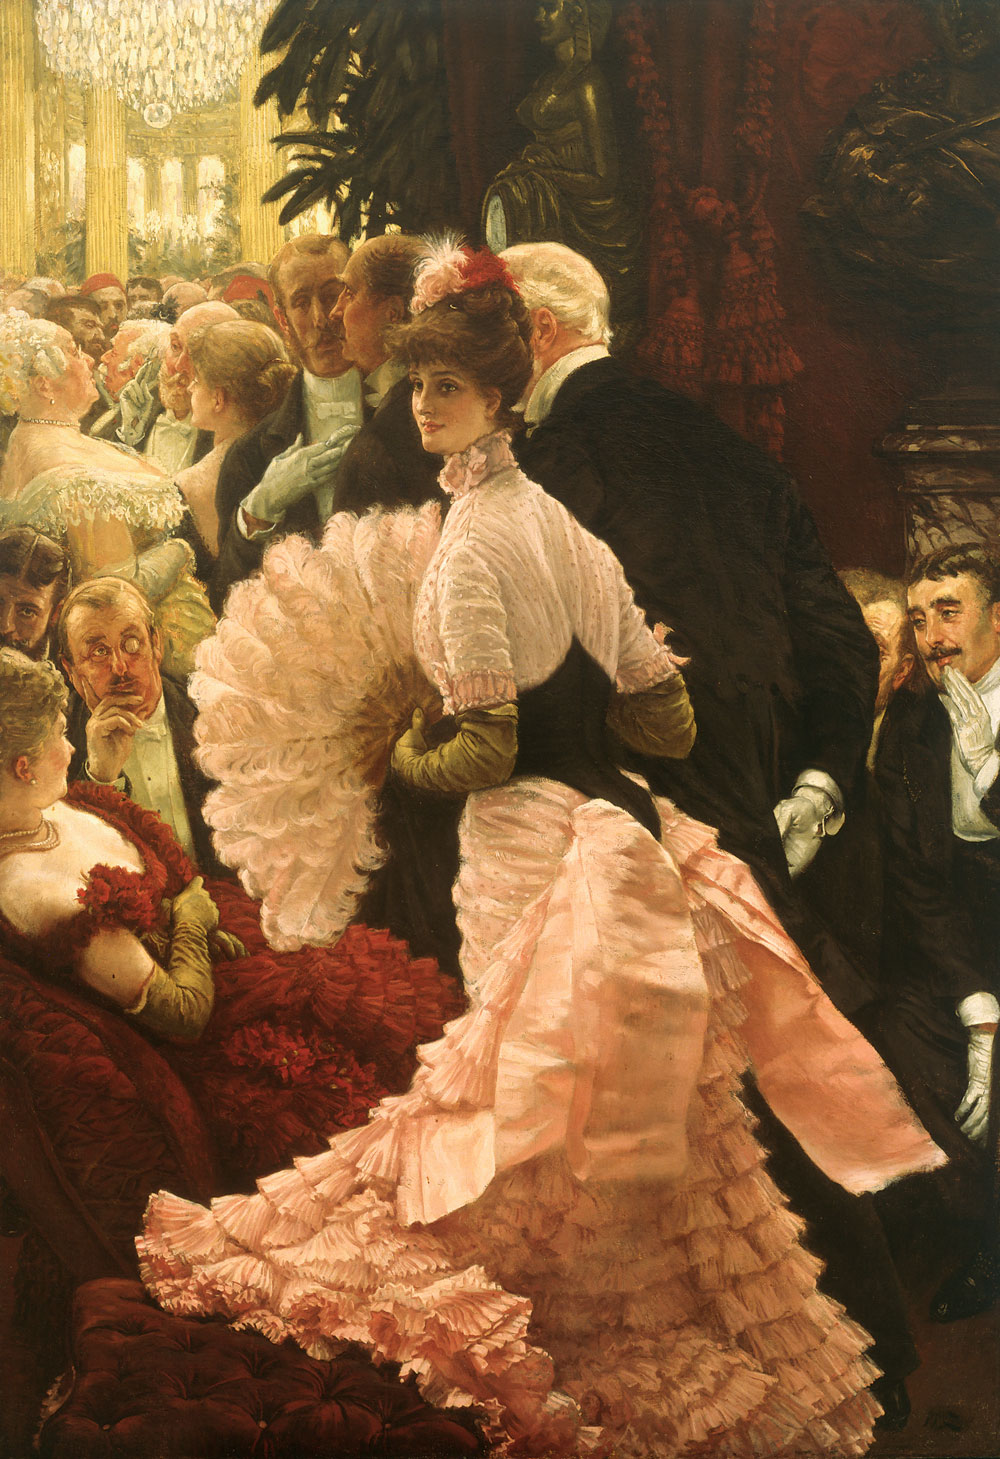 James-Jacques-Joseph Tissot (1836–1902), L’Ambitieuse, circa 1883–1885. Huile sur toile, 142 x 101 cm. Albright-Knox Art Gallery, Buffalo, New York. Gift of William M. Chase, 1909. 